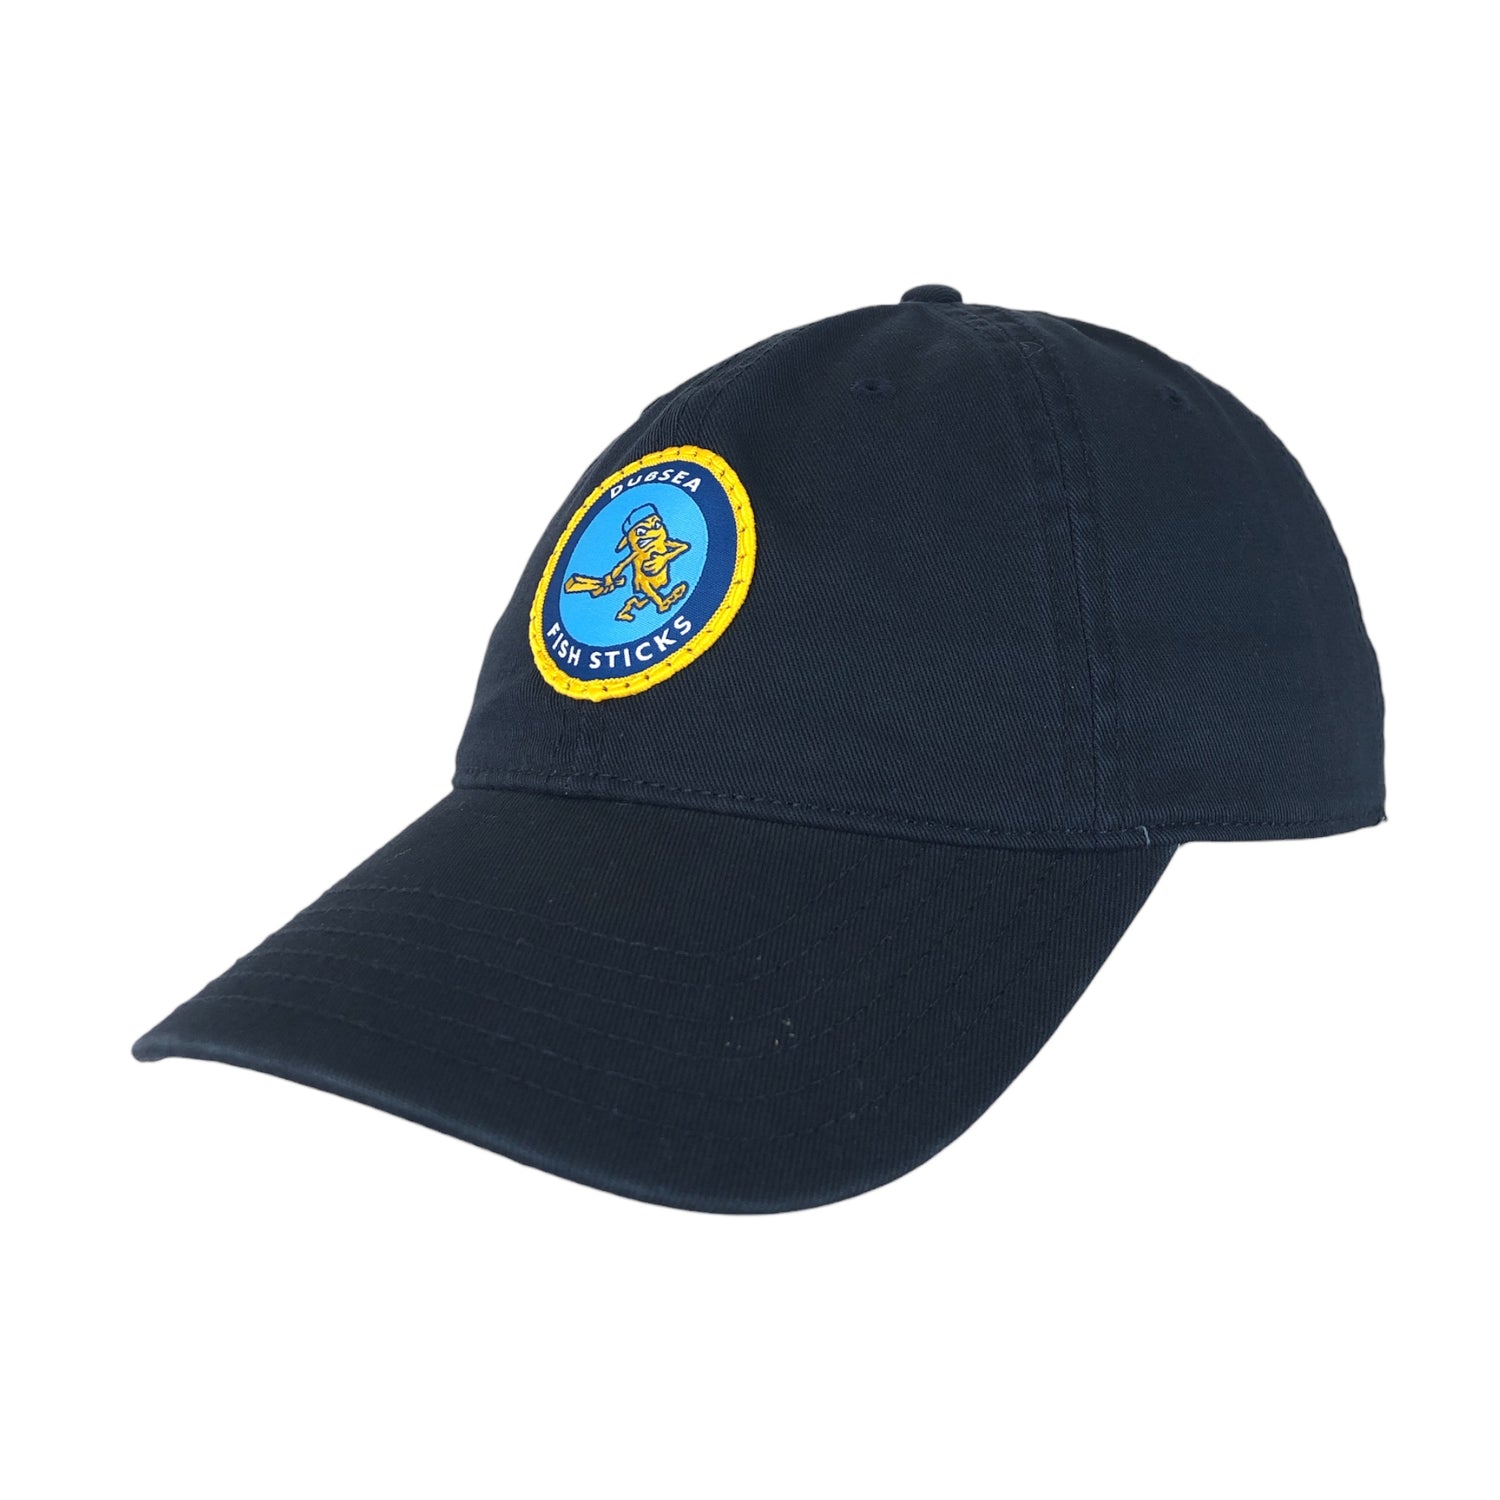 DubSea Fish Sticks navy blue adjustable dad hat with full color patch.